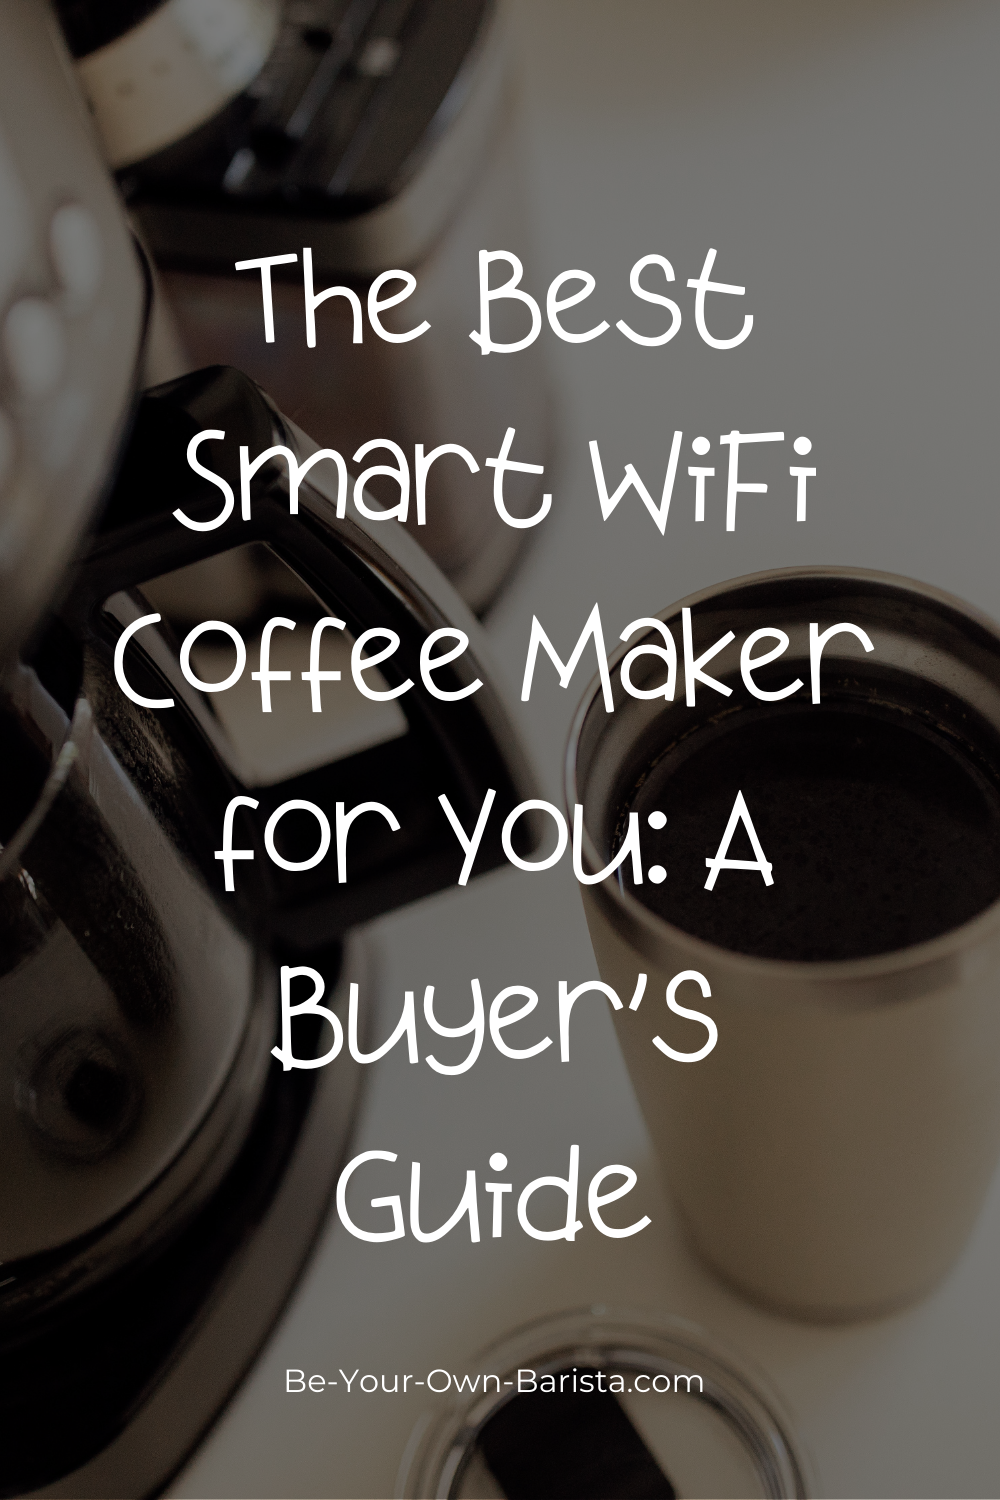 WiFi Coffee Maker Buyer’s Guide (How to Find the Best Smart Coffee Maker)